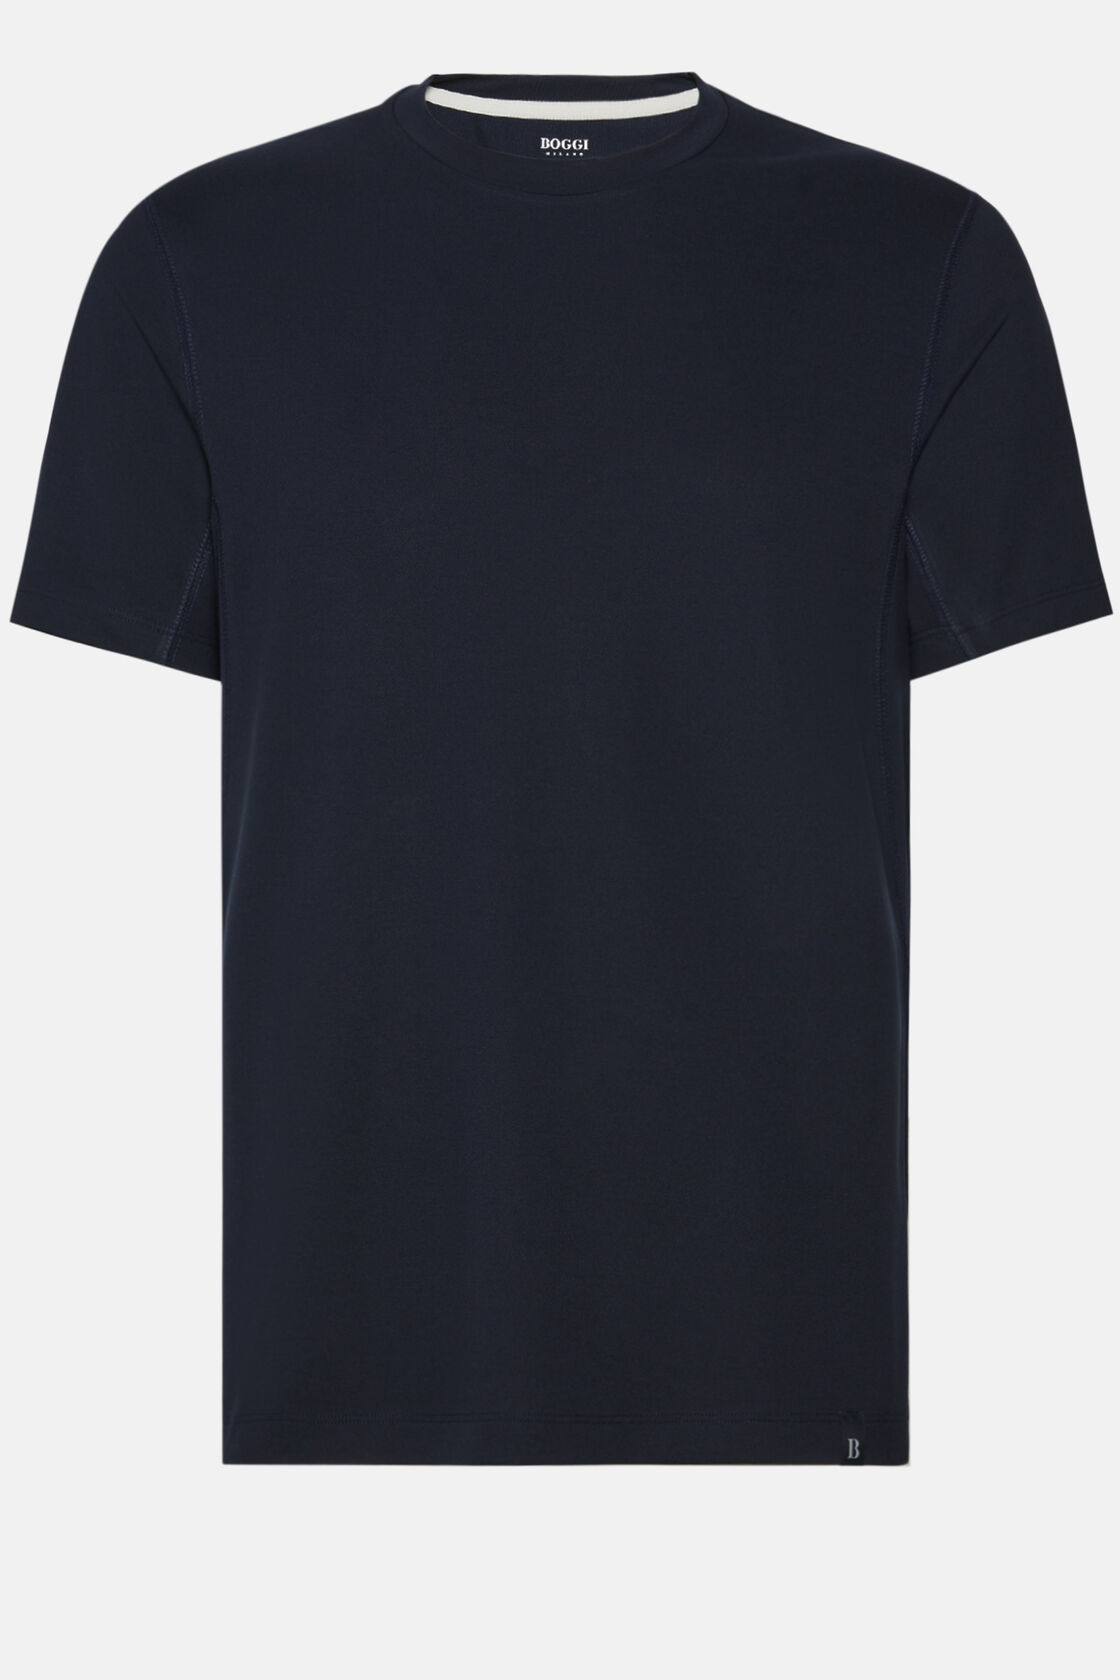 T-Shirt in Sustainable Performance Pique, Navy blue, hi-res